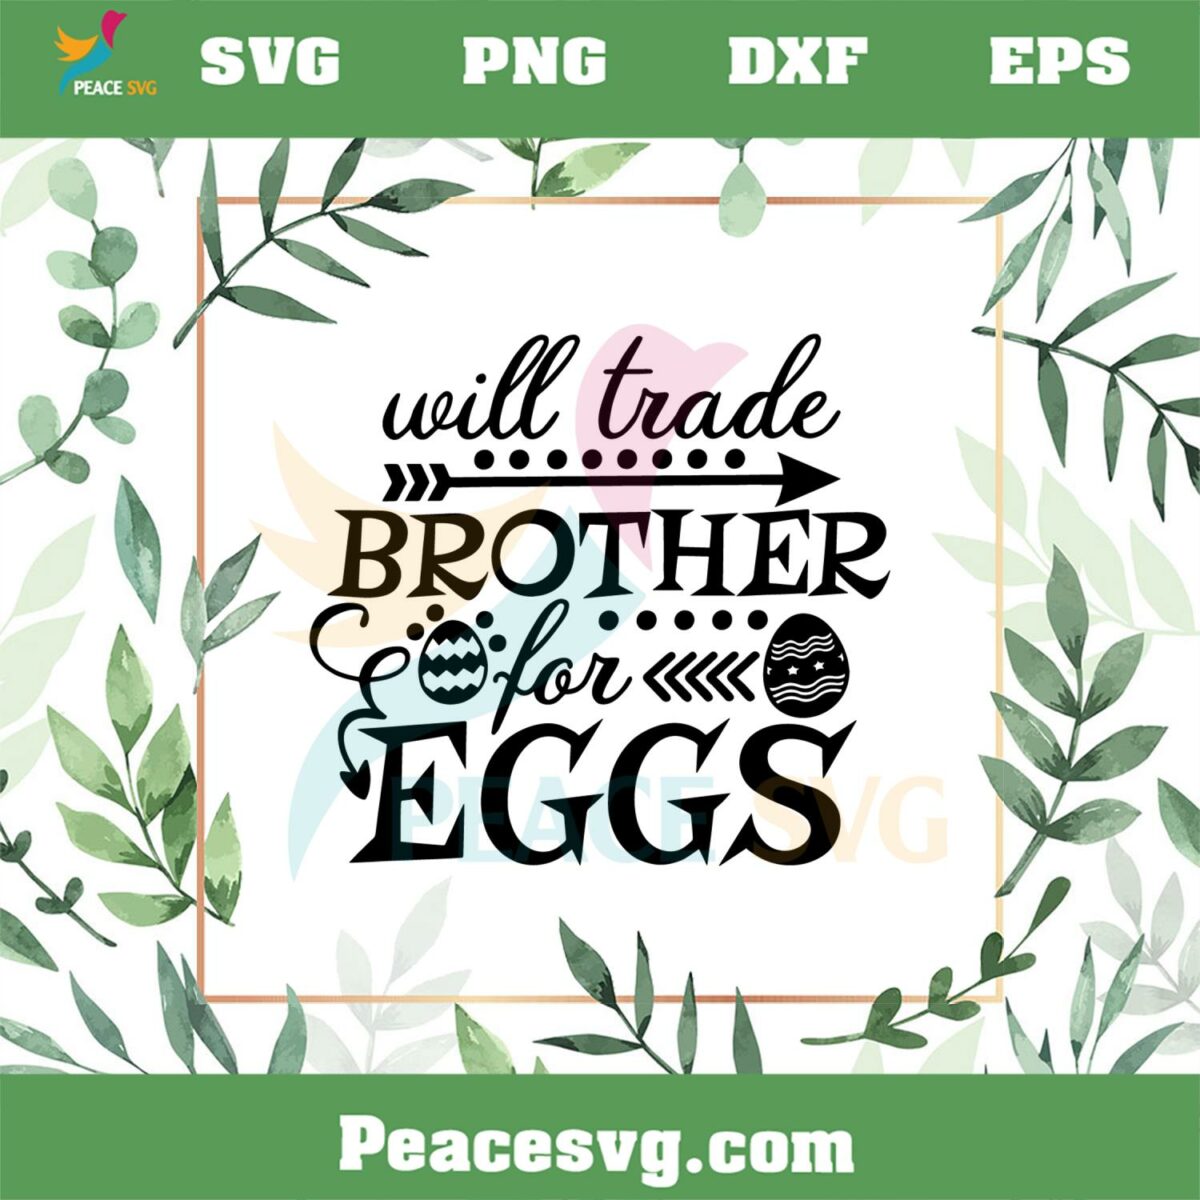 Will Trade Brother For Eggs Funny Easter Egg SVG Cutting Files